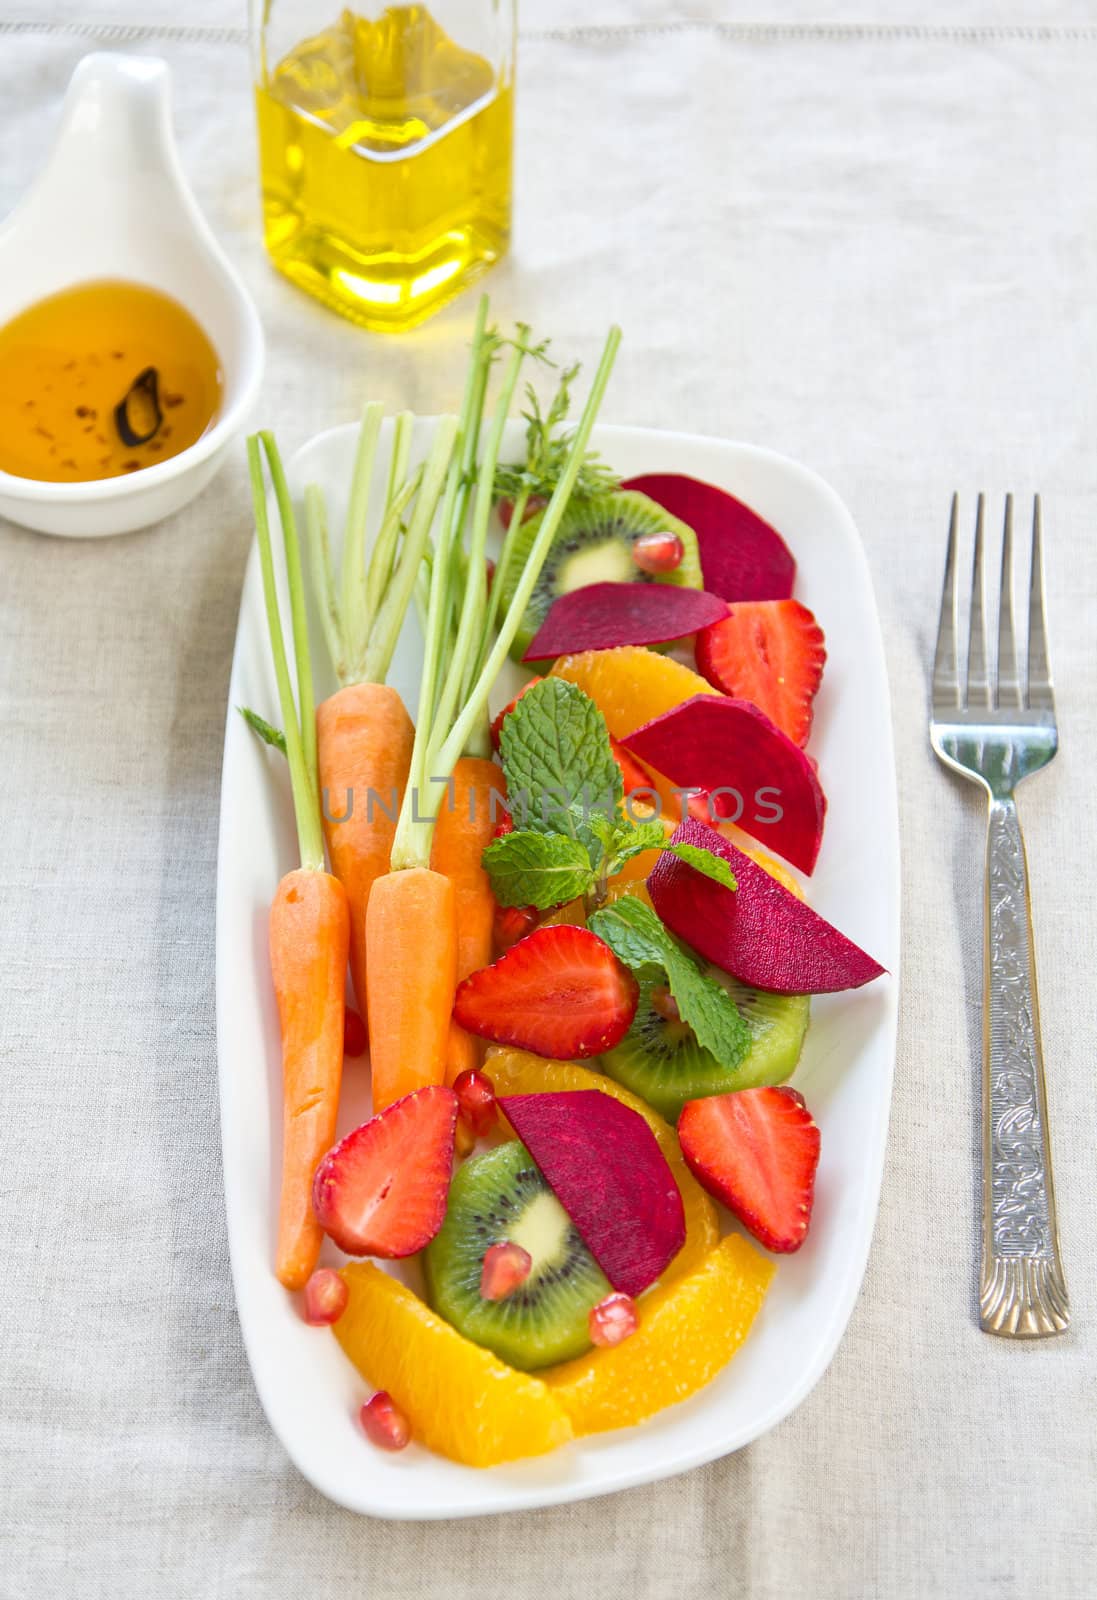 Fresh orange,kiwi,strawberry,pomegranate with baby carrot and beetroot salad by chilli oil